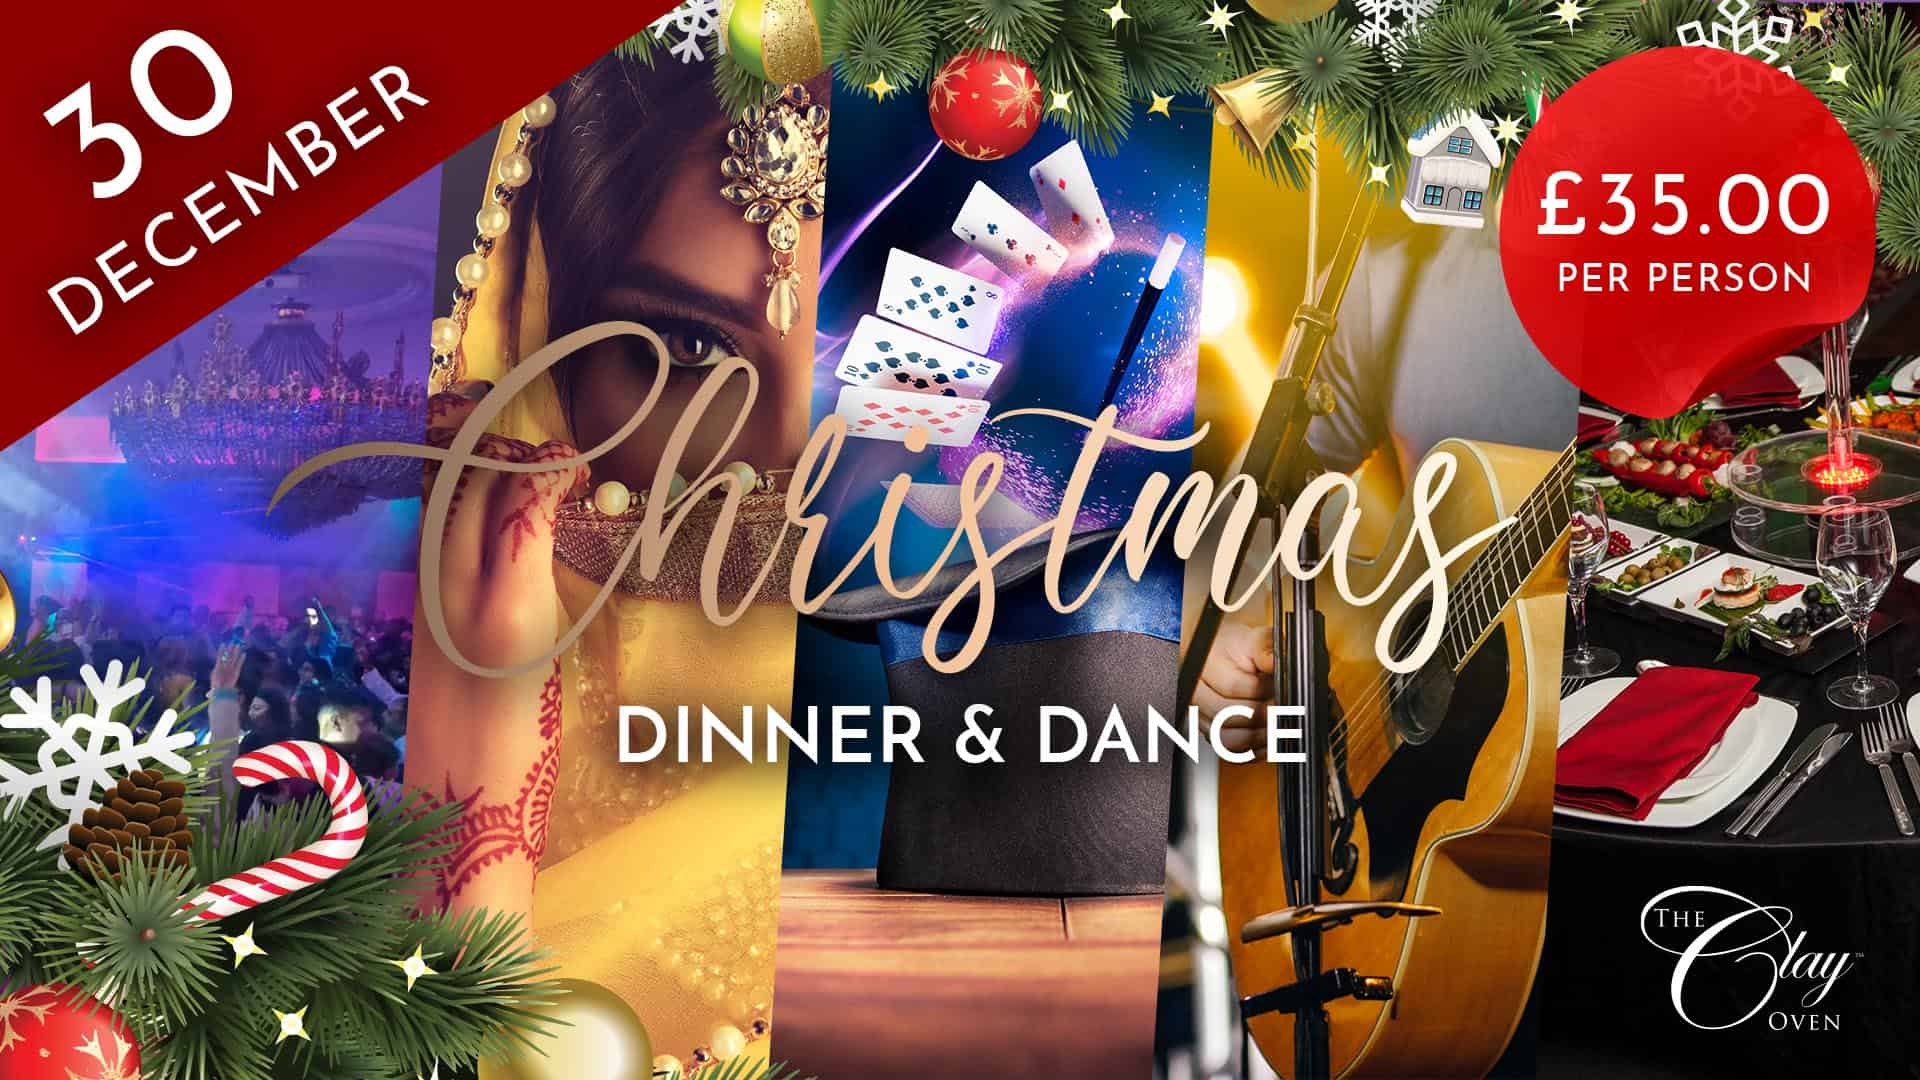 Holiday gala featuring a festive Christmas dinner and dance.